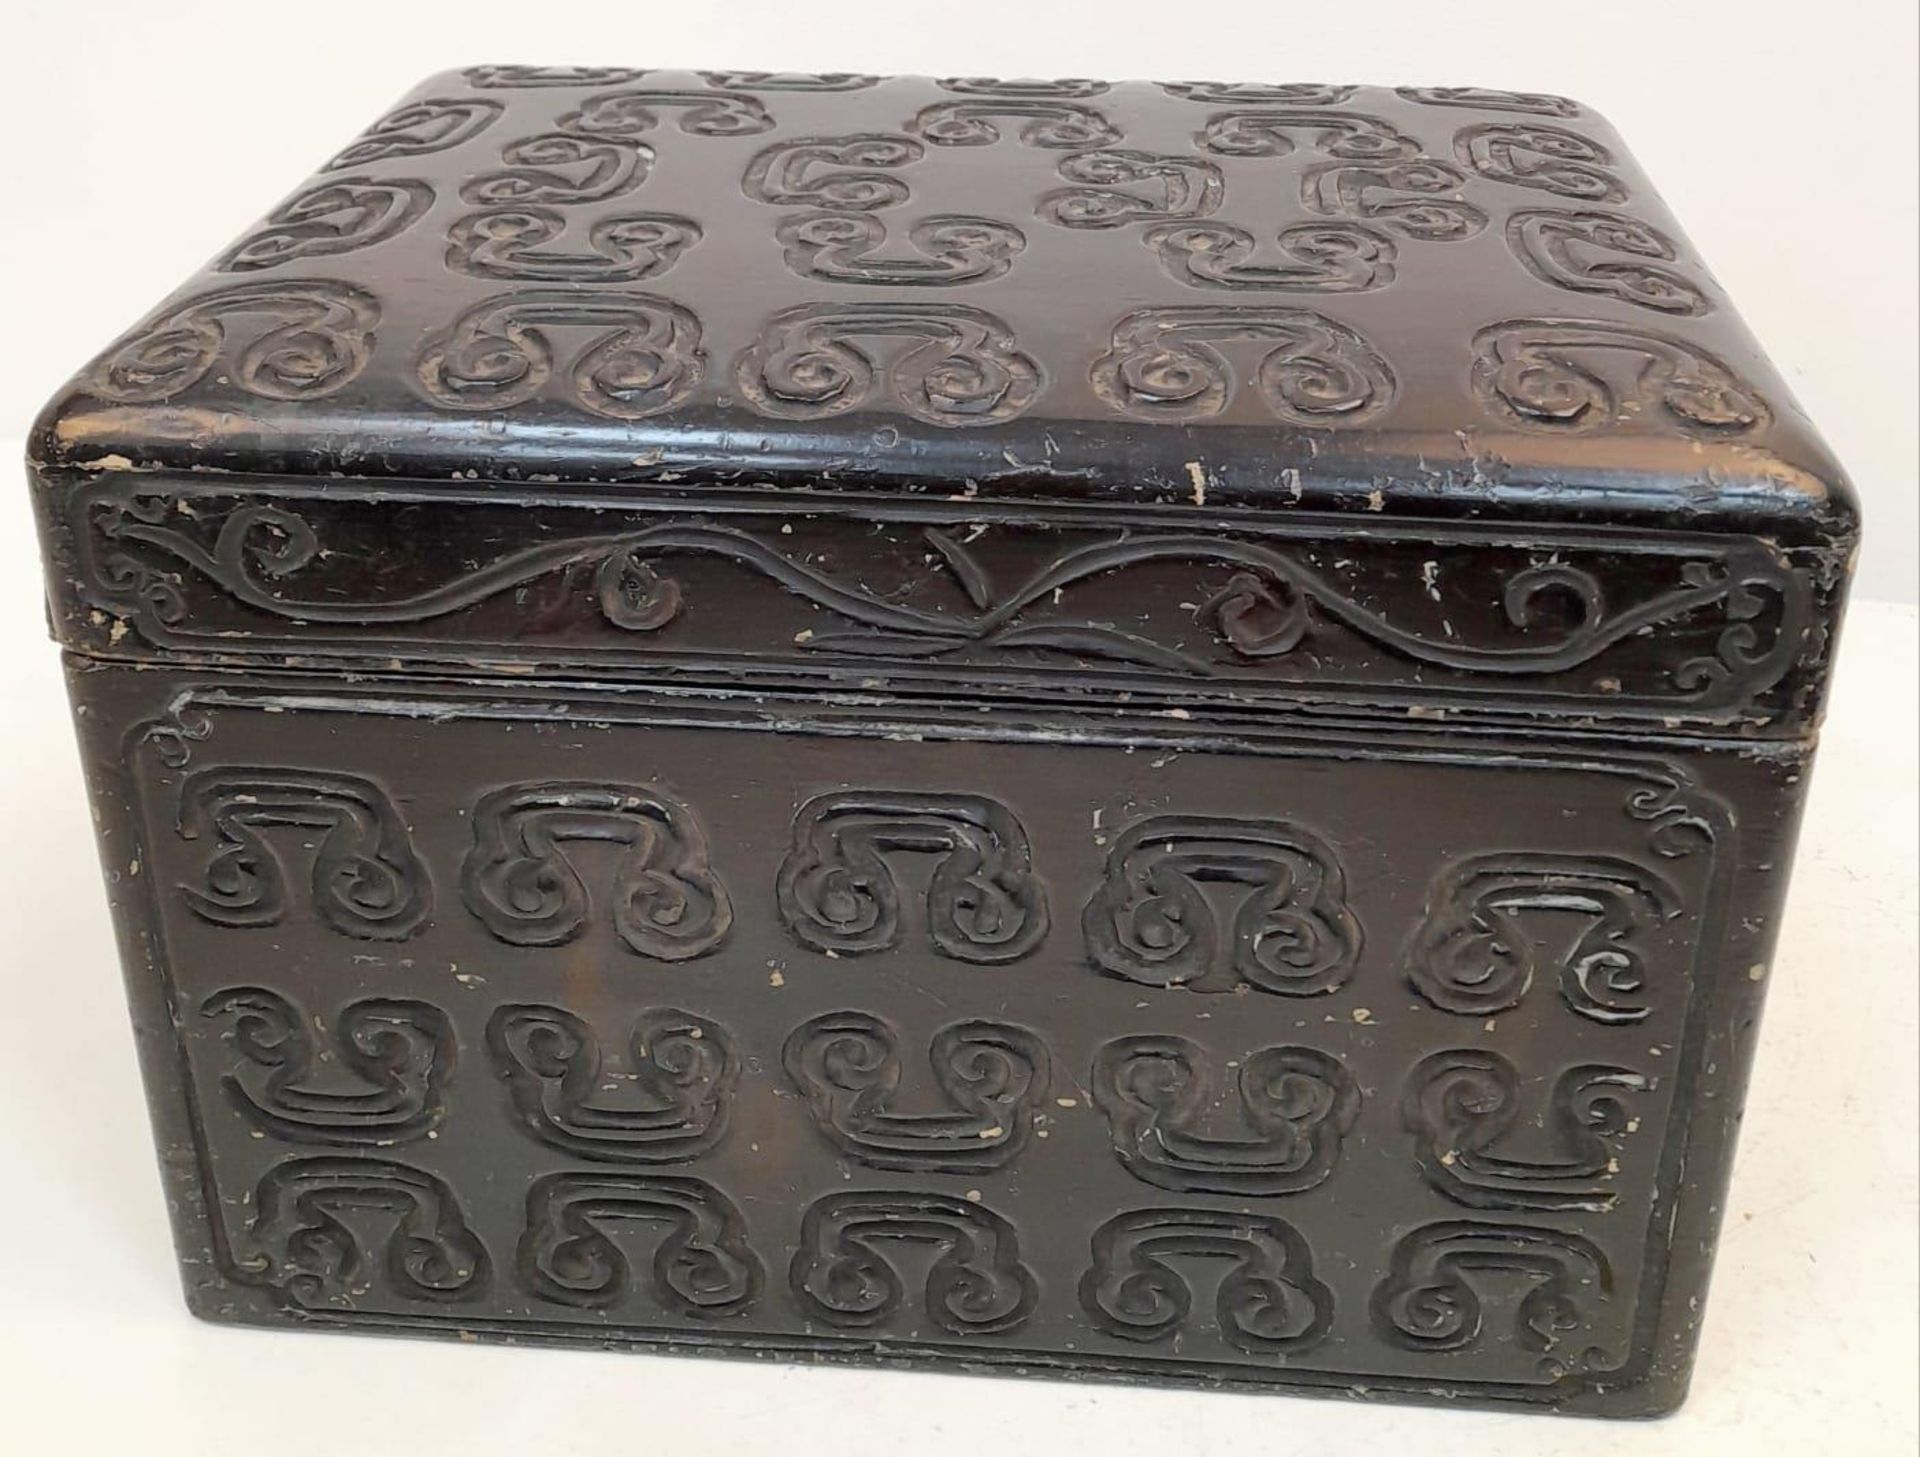 A Fascinating and Wonderful Antique Chinese Large Lacquered Box - 18th century, possibly earlier.